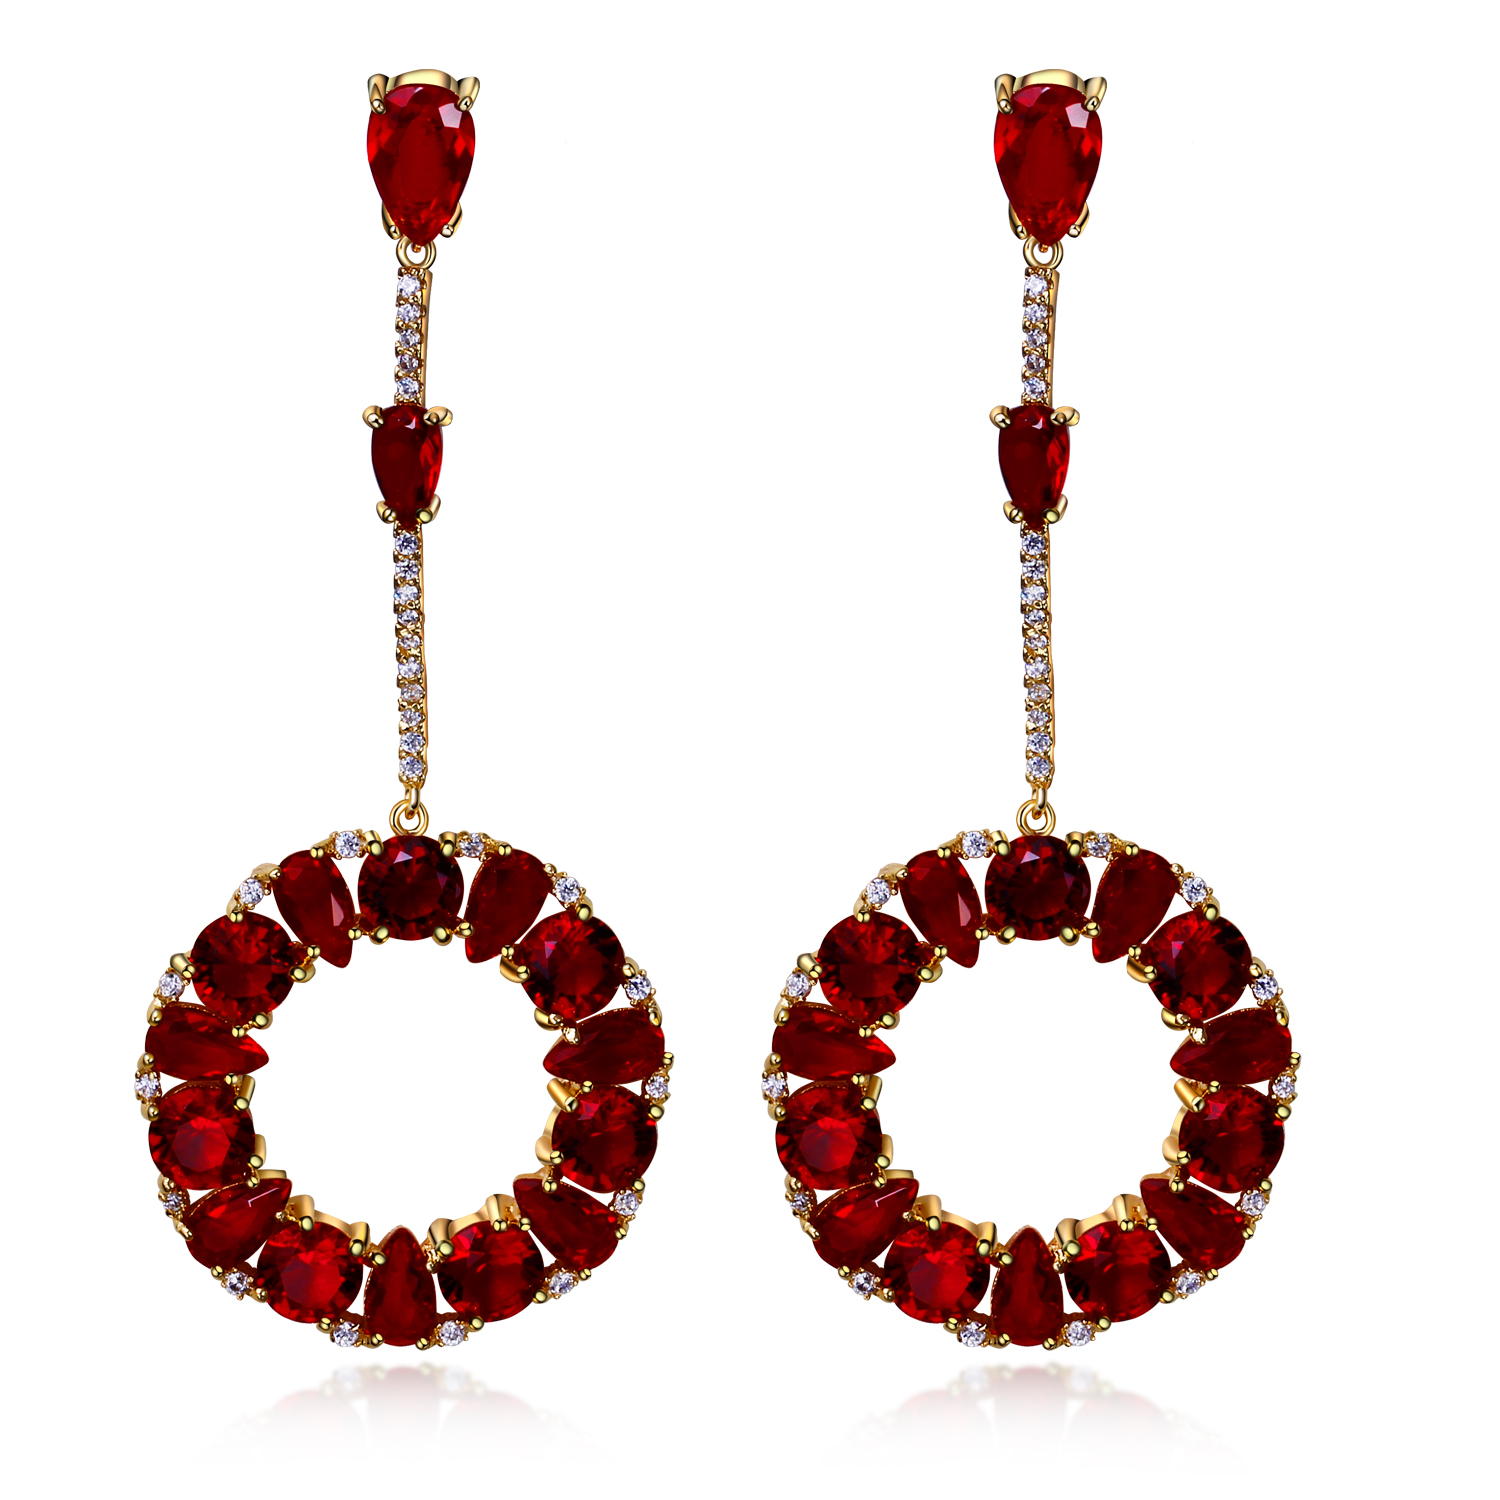 74 MM Long Earrings, 18K Gold plate Setting with 4 colors Cubic Zirconia, Round Pendant Earrings